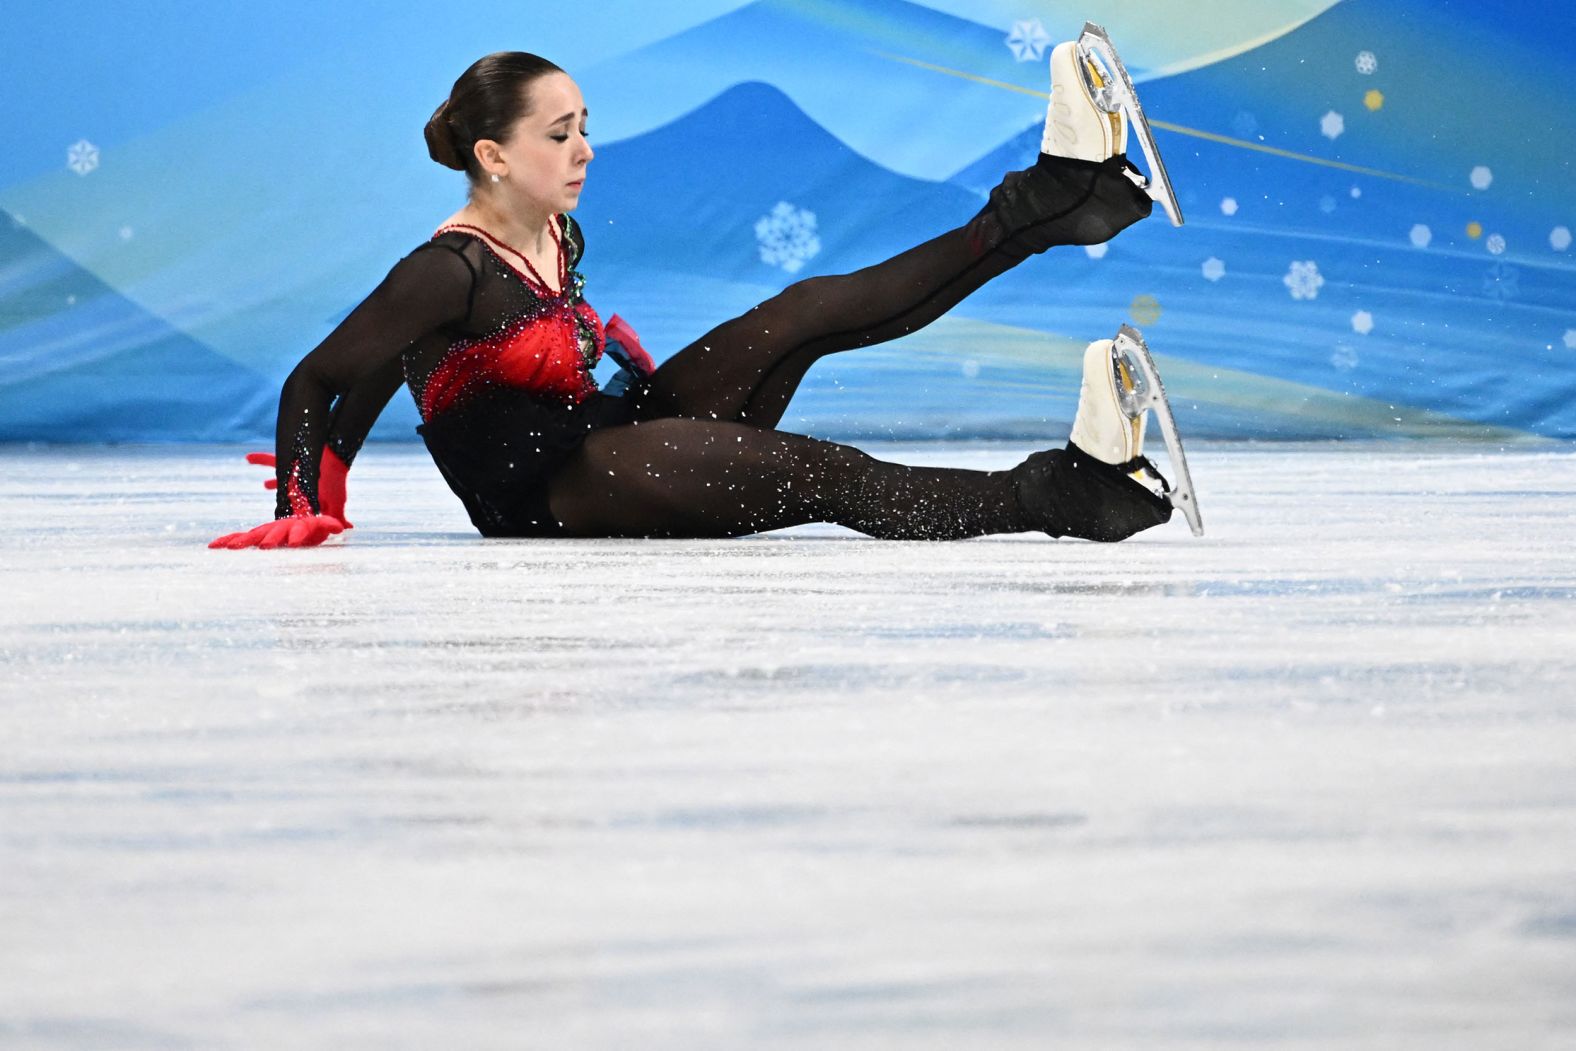 Kamila Valieva, the Russian figure skater who has been at the center of a doping controversy at the Beijing Winter Olympics, <a href="index.php?page=&url=https%3A%2F%2Fwww.cnn.com%2F2022%2F02%2F17%2Fsport%2Fkamila-valieva-results-free-skating-olympics-spt-intl%2Findex.html" target="_blank">fell multiple times during her free skate </a>on February 17 and finished fourth in the women's singles competition. The 15-year-old star tested positive for a banned substance in December, before the Olympics, and officials are still investigating whether she or her entourage broke anti-doping rules. <a href="index.php?page=&url=https%3A%2F%2Fwww.cnn.com%2F2022%2F02%2F17%2Fsport%2Fkamila-valieva-results-free-skating-olympics-spt-intl%2Findex.html" target="_blank">She was provisionally cleared to compete,</a> but if she had won she would not have awarded the gold until the conclusion of the investigation.